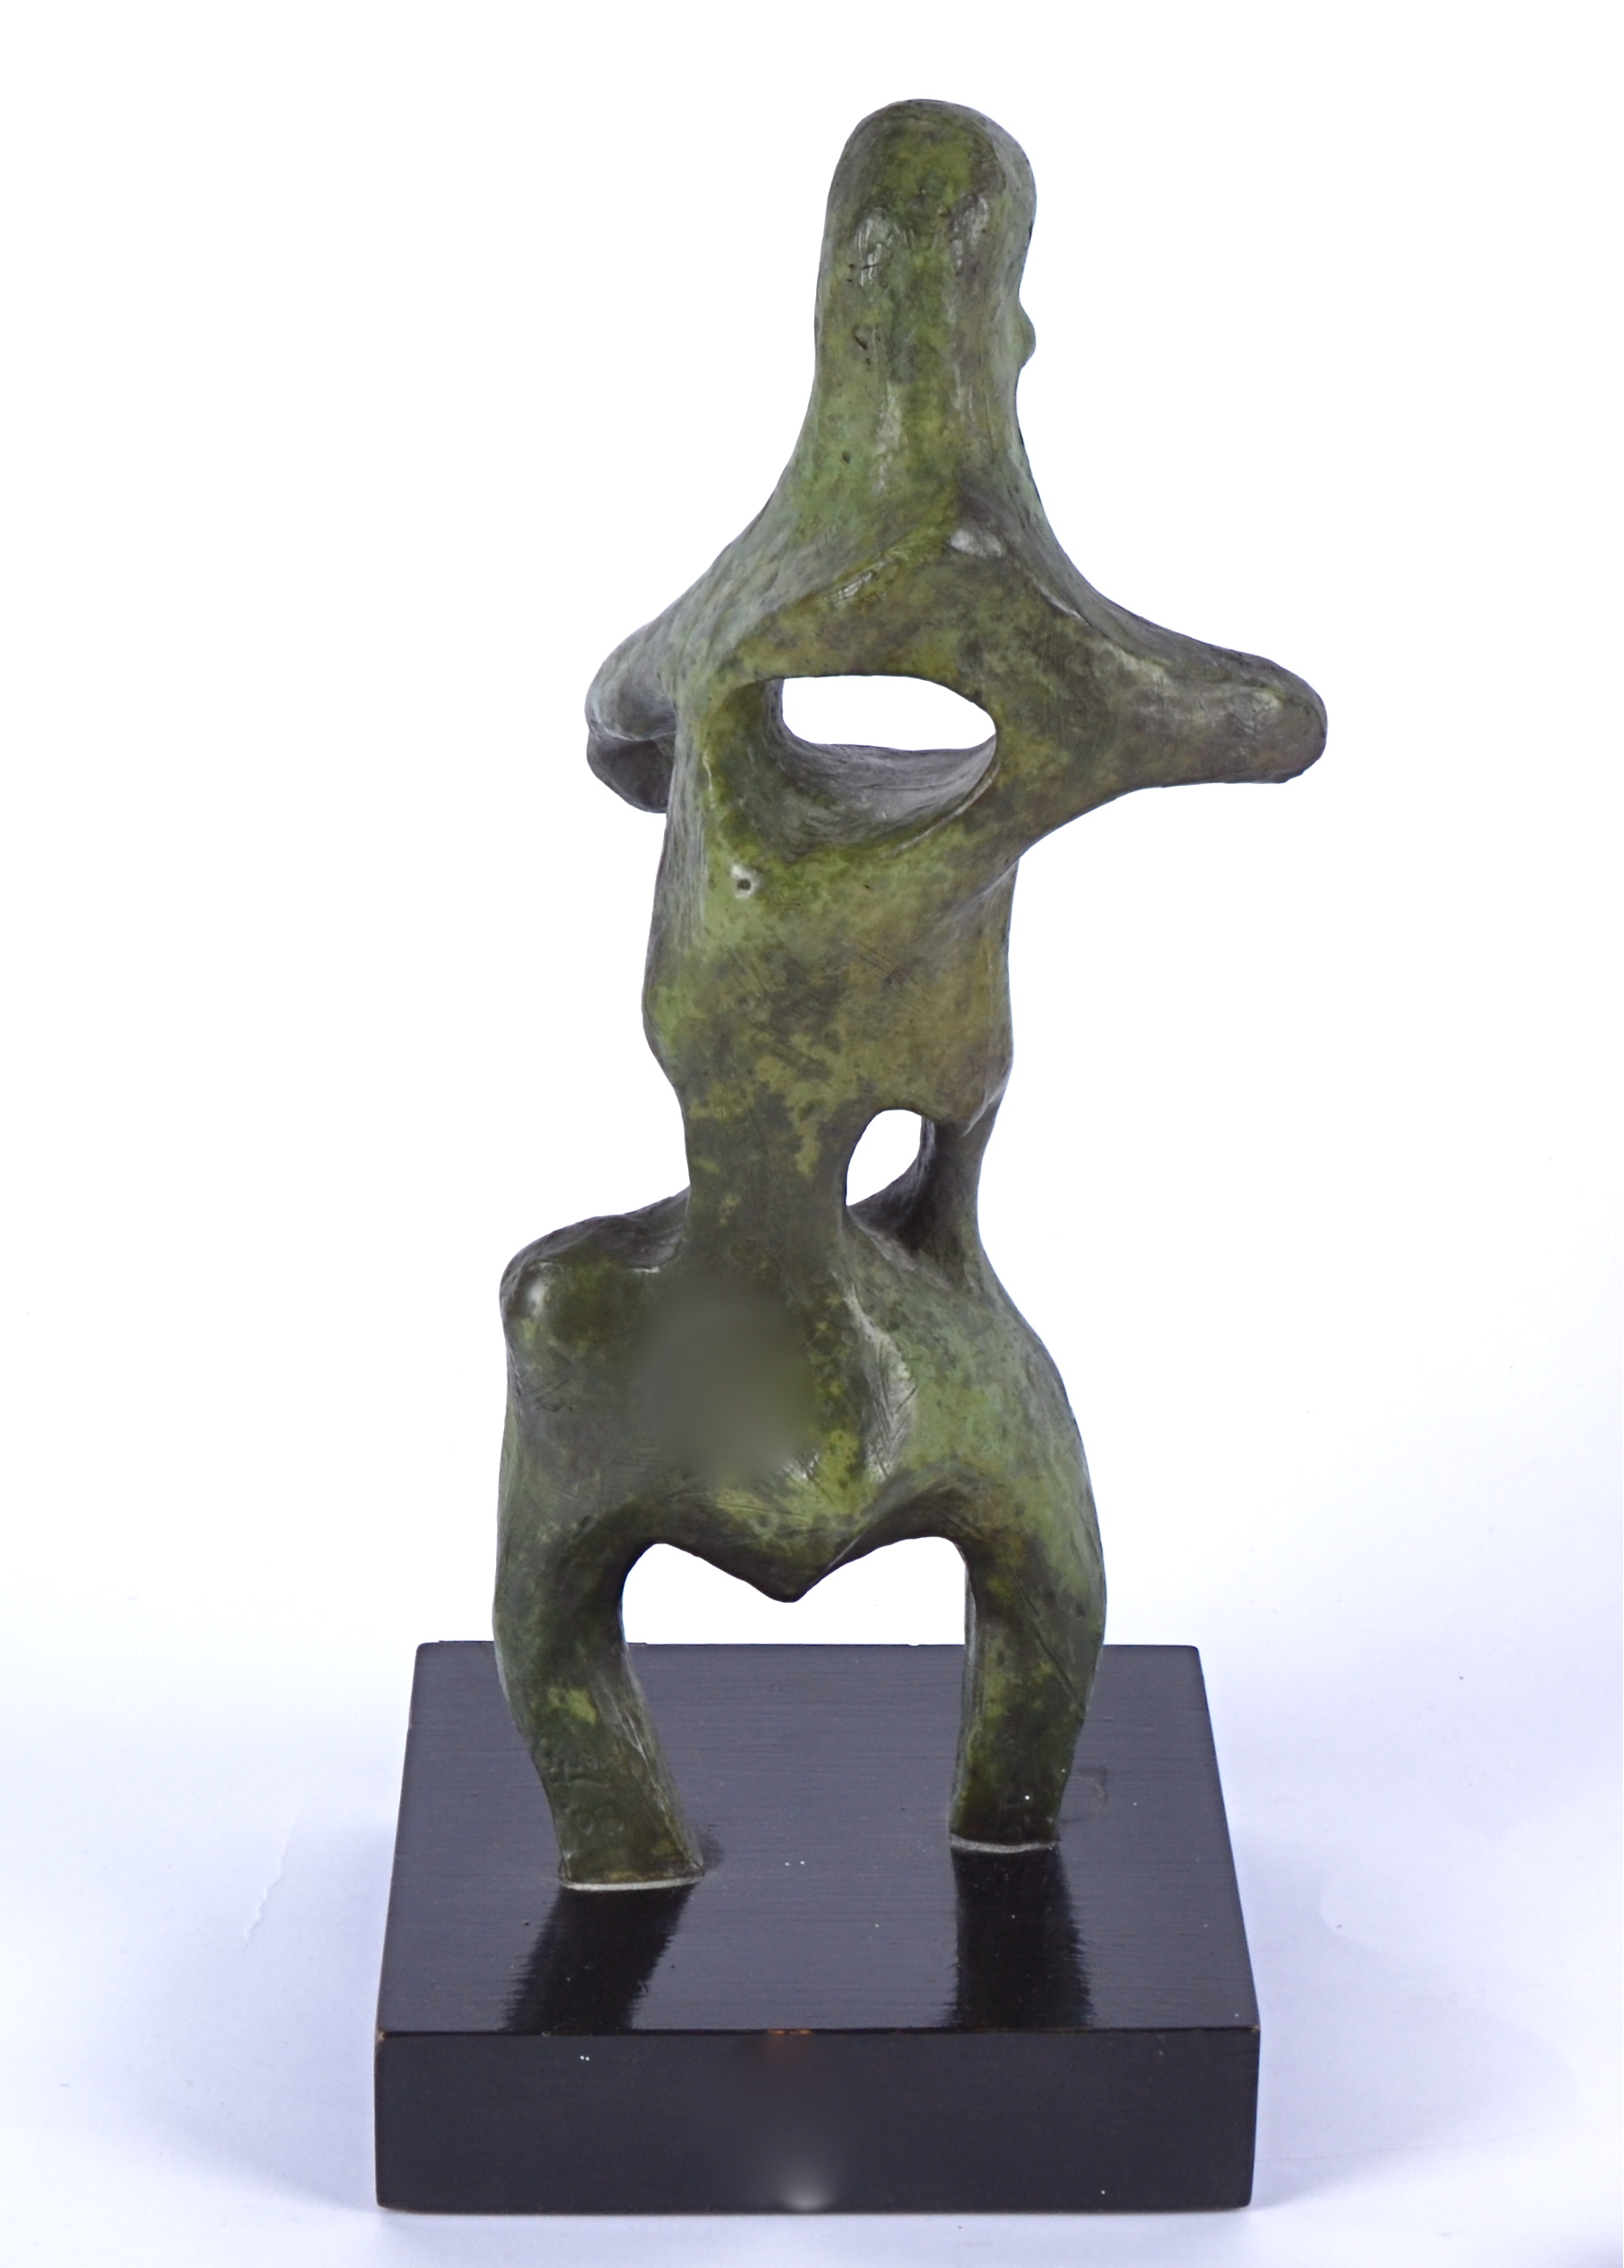 Eli Ilan (1928-1982) 'Gladiator' bronze maquette, mounted on a square wooden base with a plaque, - Image 4 of 9